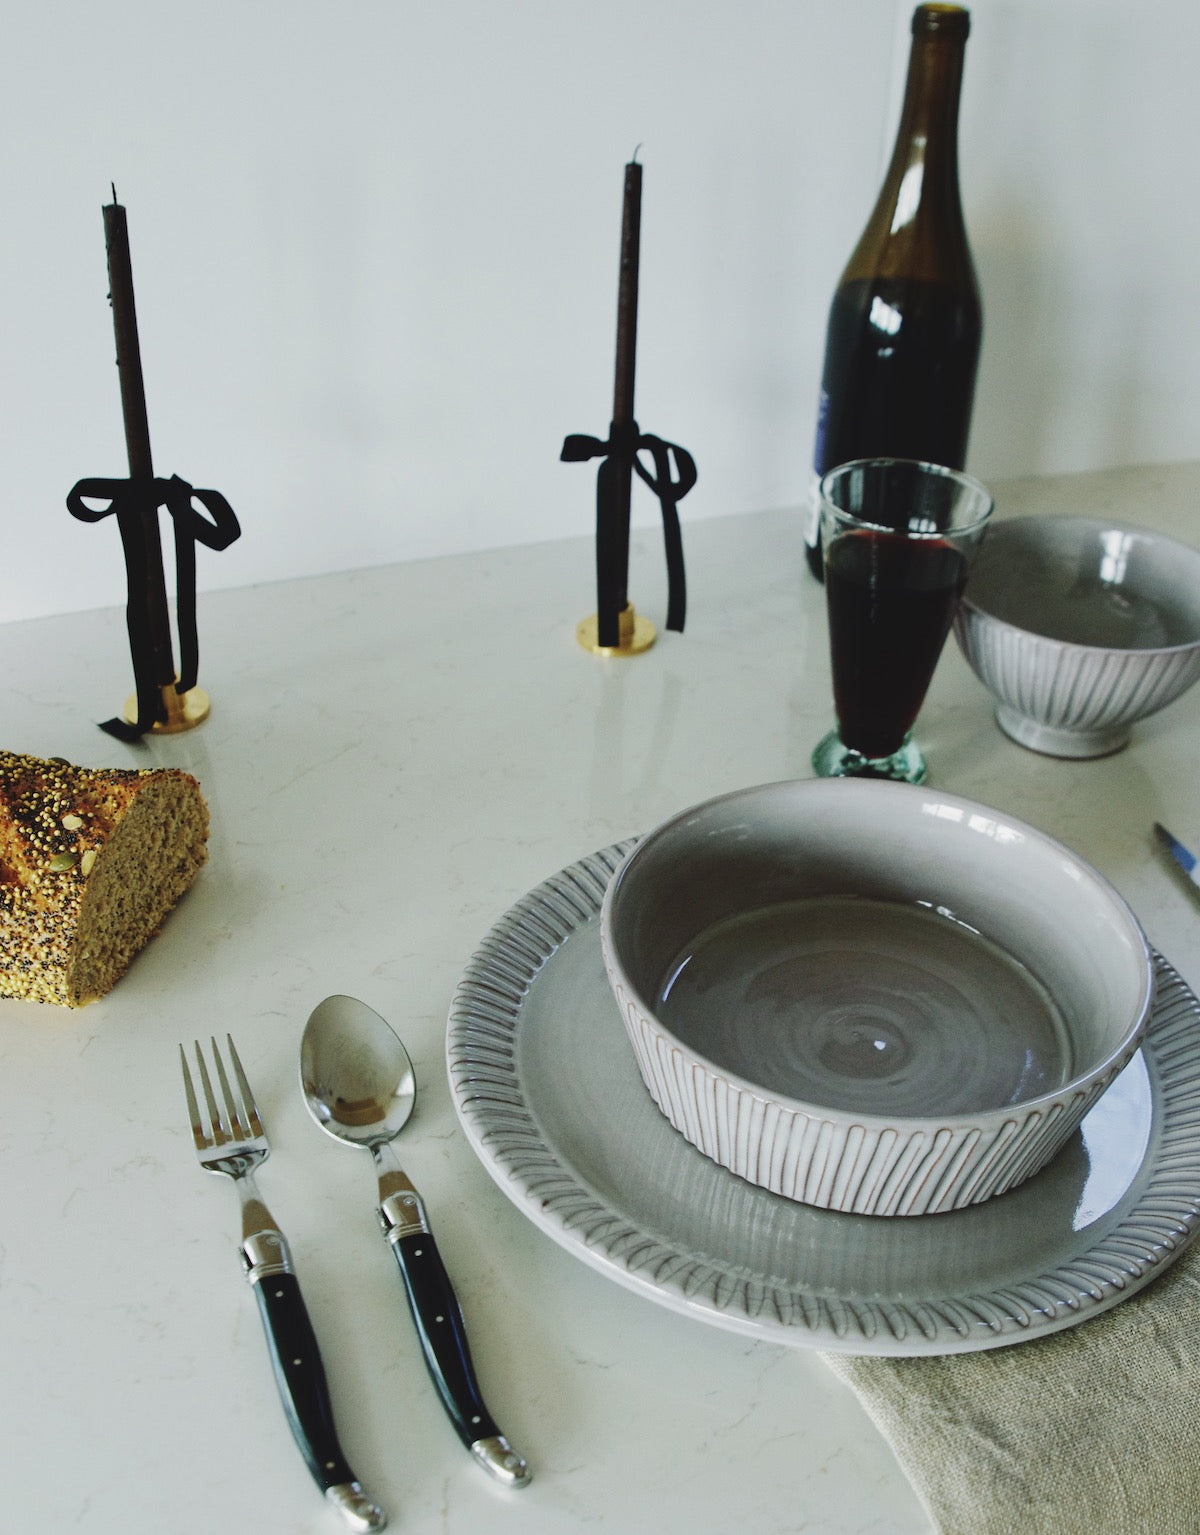 A stylish table setup with French charm, showcasing a gray ribbed dinner plate topped with a matching bowl. Beside the plate lies a set of French Laguiole cutlery with black handles, including a spoon and fork. In the background, two black candles with ribbon-tied brass holders, a half-eaten loaf of seed-encrusted bread, a bottle of red wine, and a filled wine glass add to the ambiance, all set on a marble countertop.